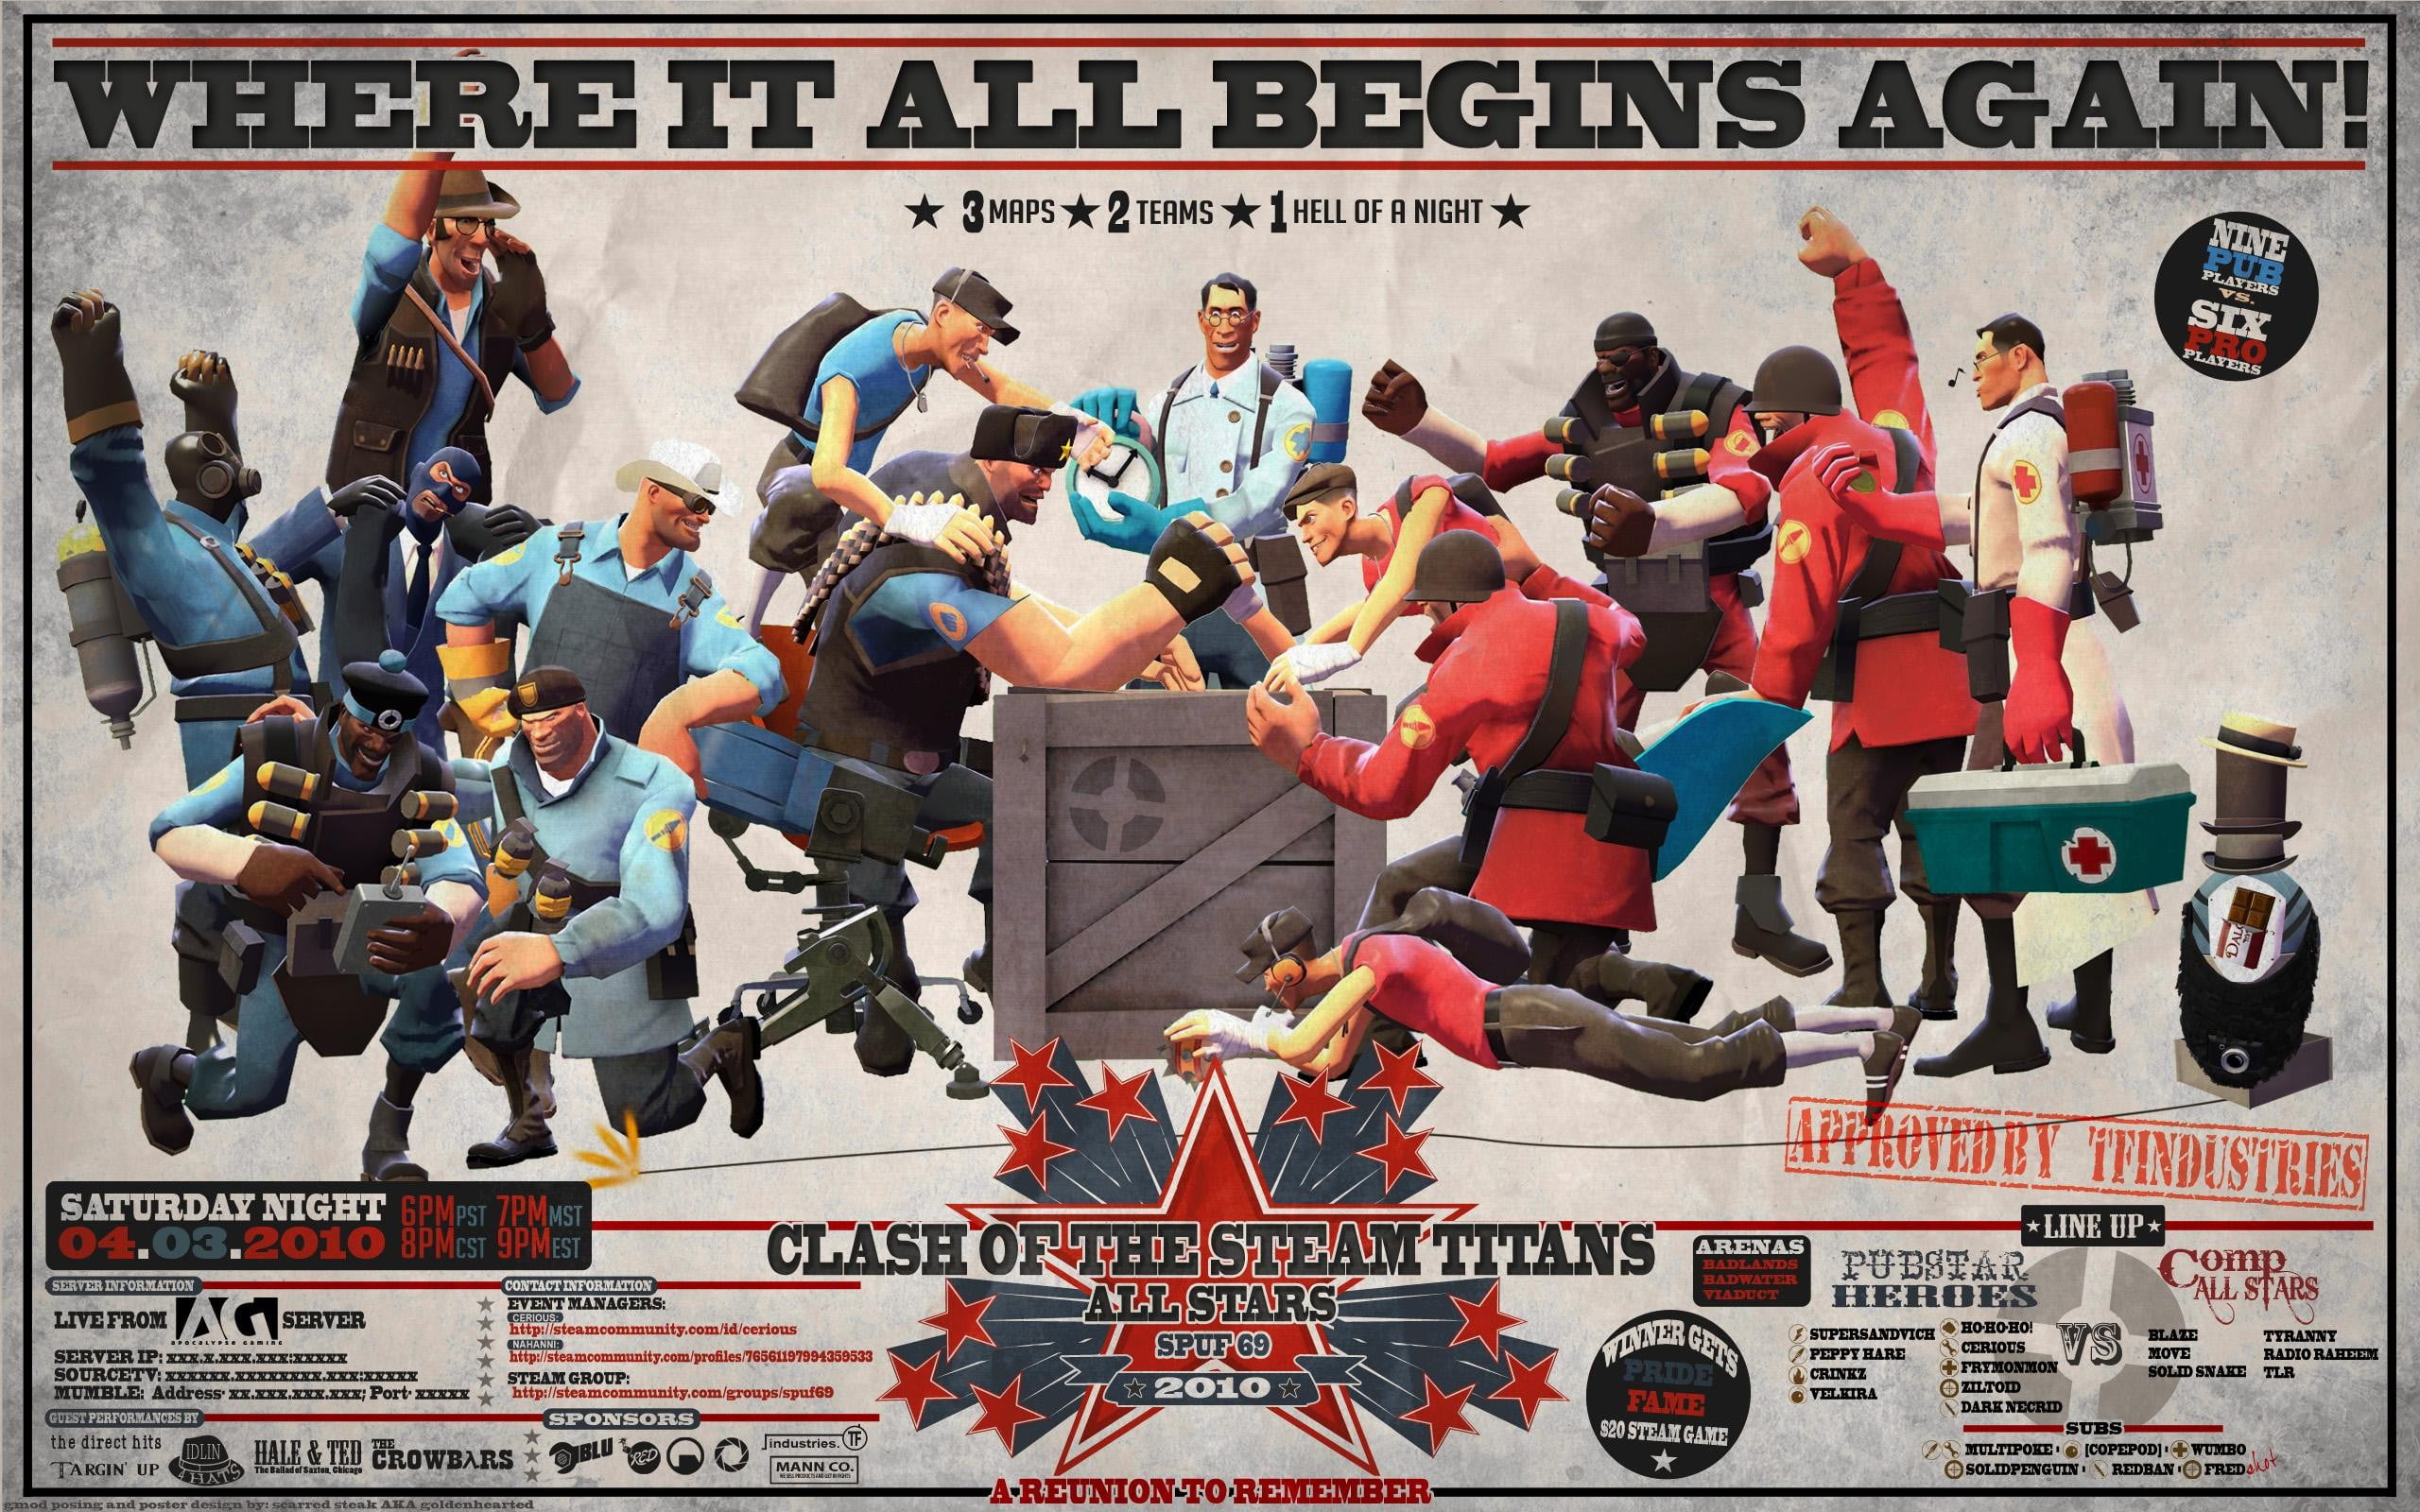 Clash of The Steam Titans poster, Team Fortress 2, video games